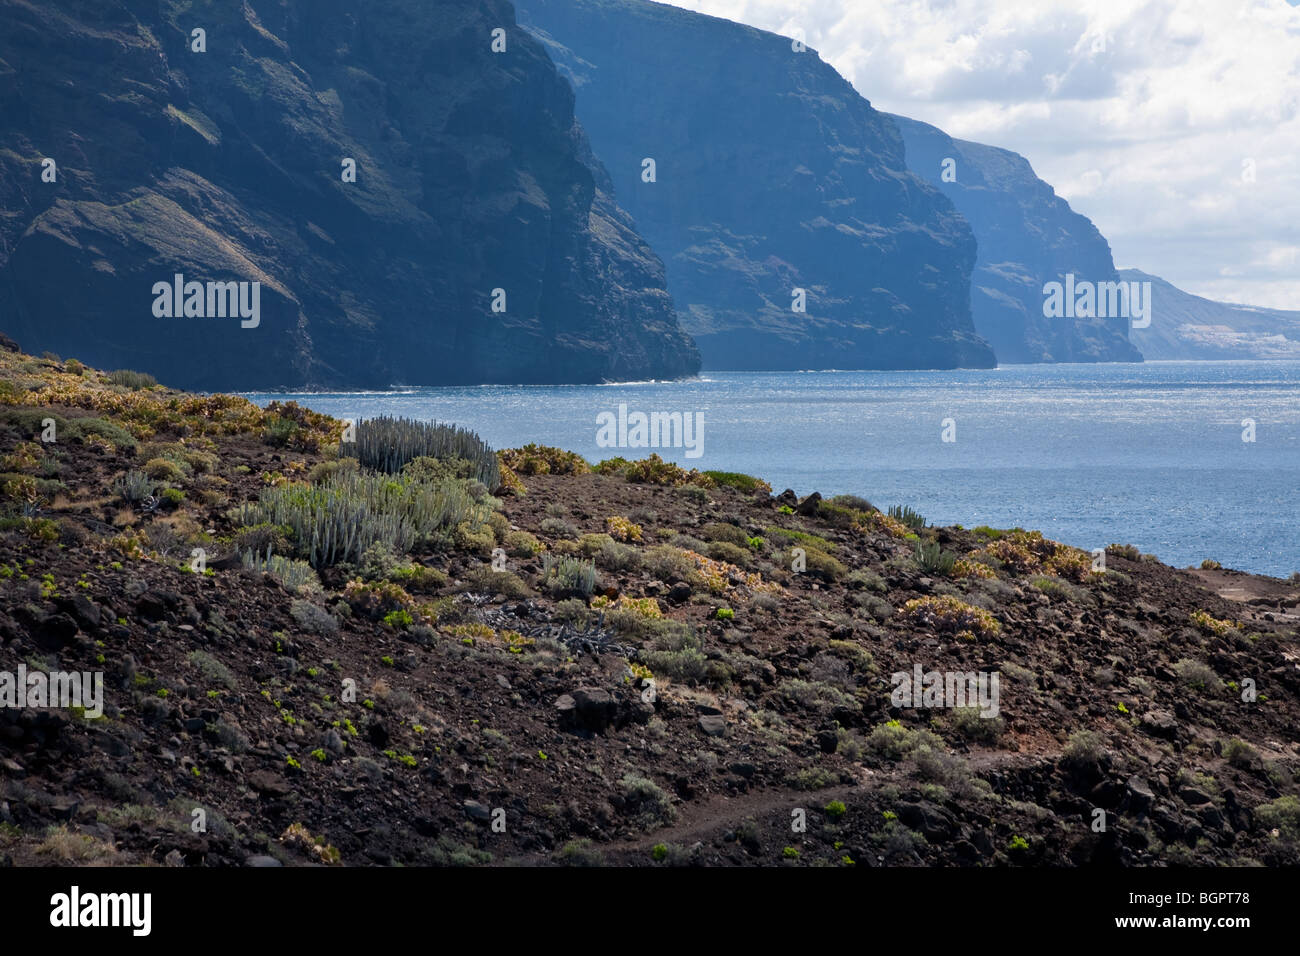 Gigantes cliffs from Punta de Teno, Tenerife Canary Islands. The most westerly point of the island. Sea cliffs are almost 600m. Stock Photo